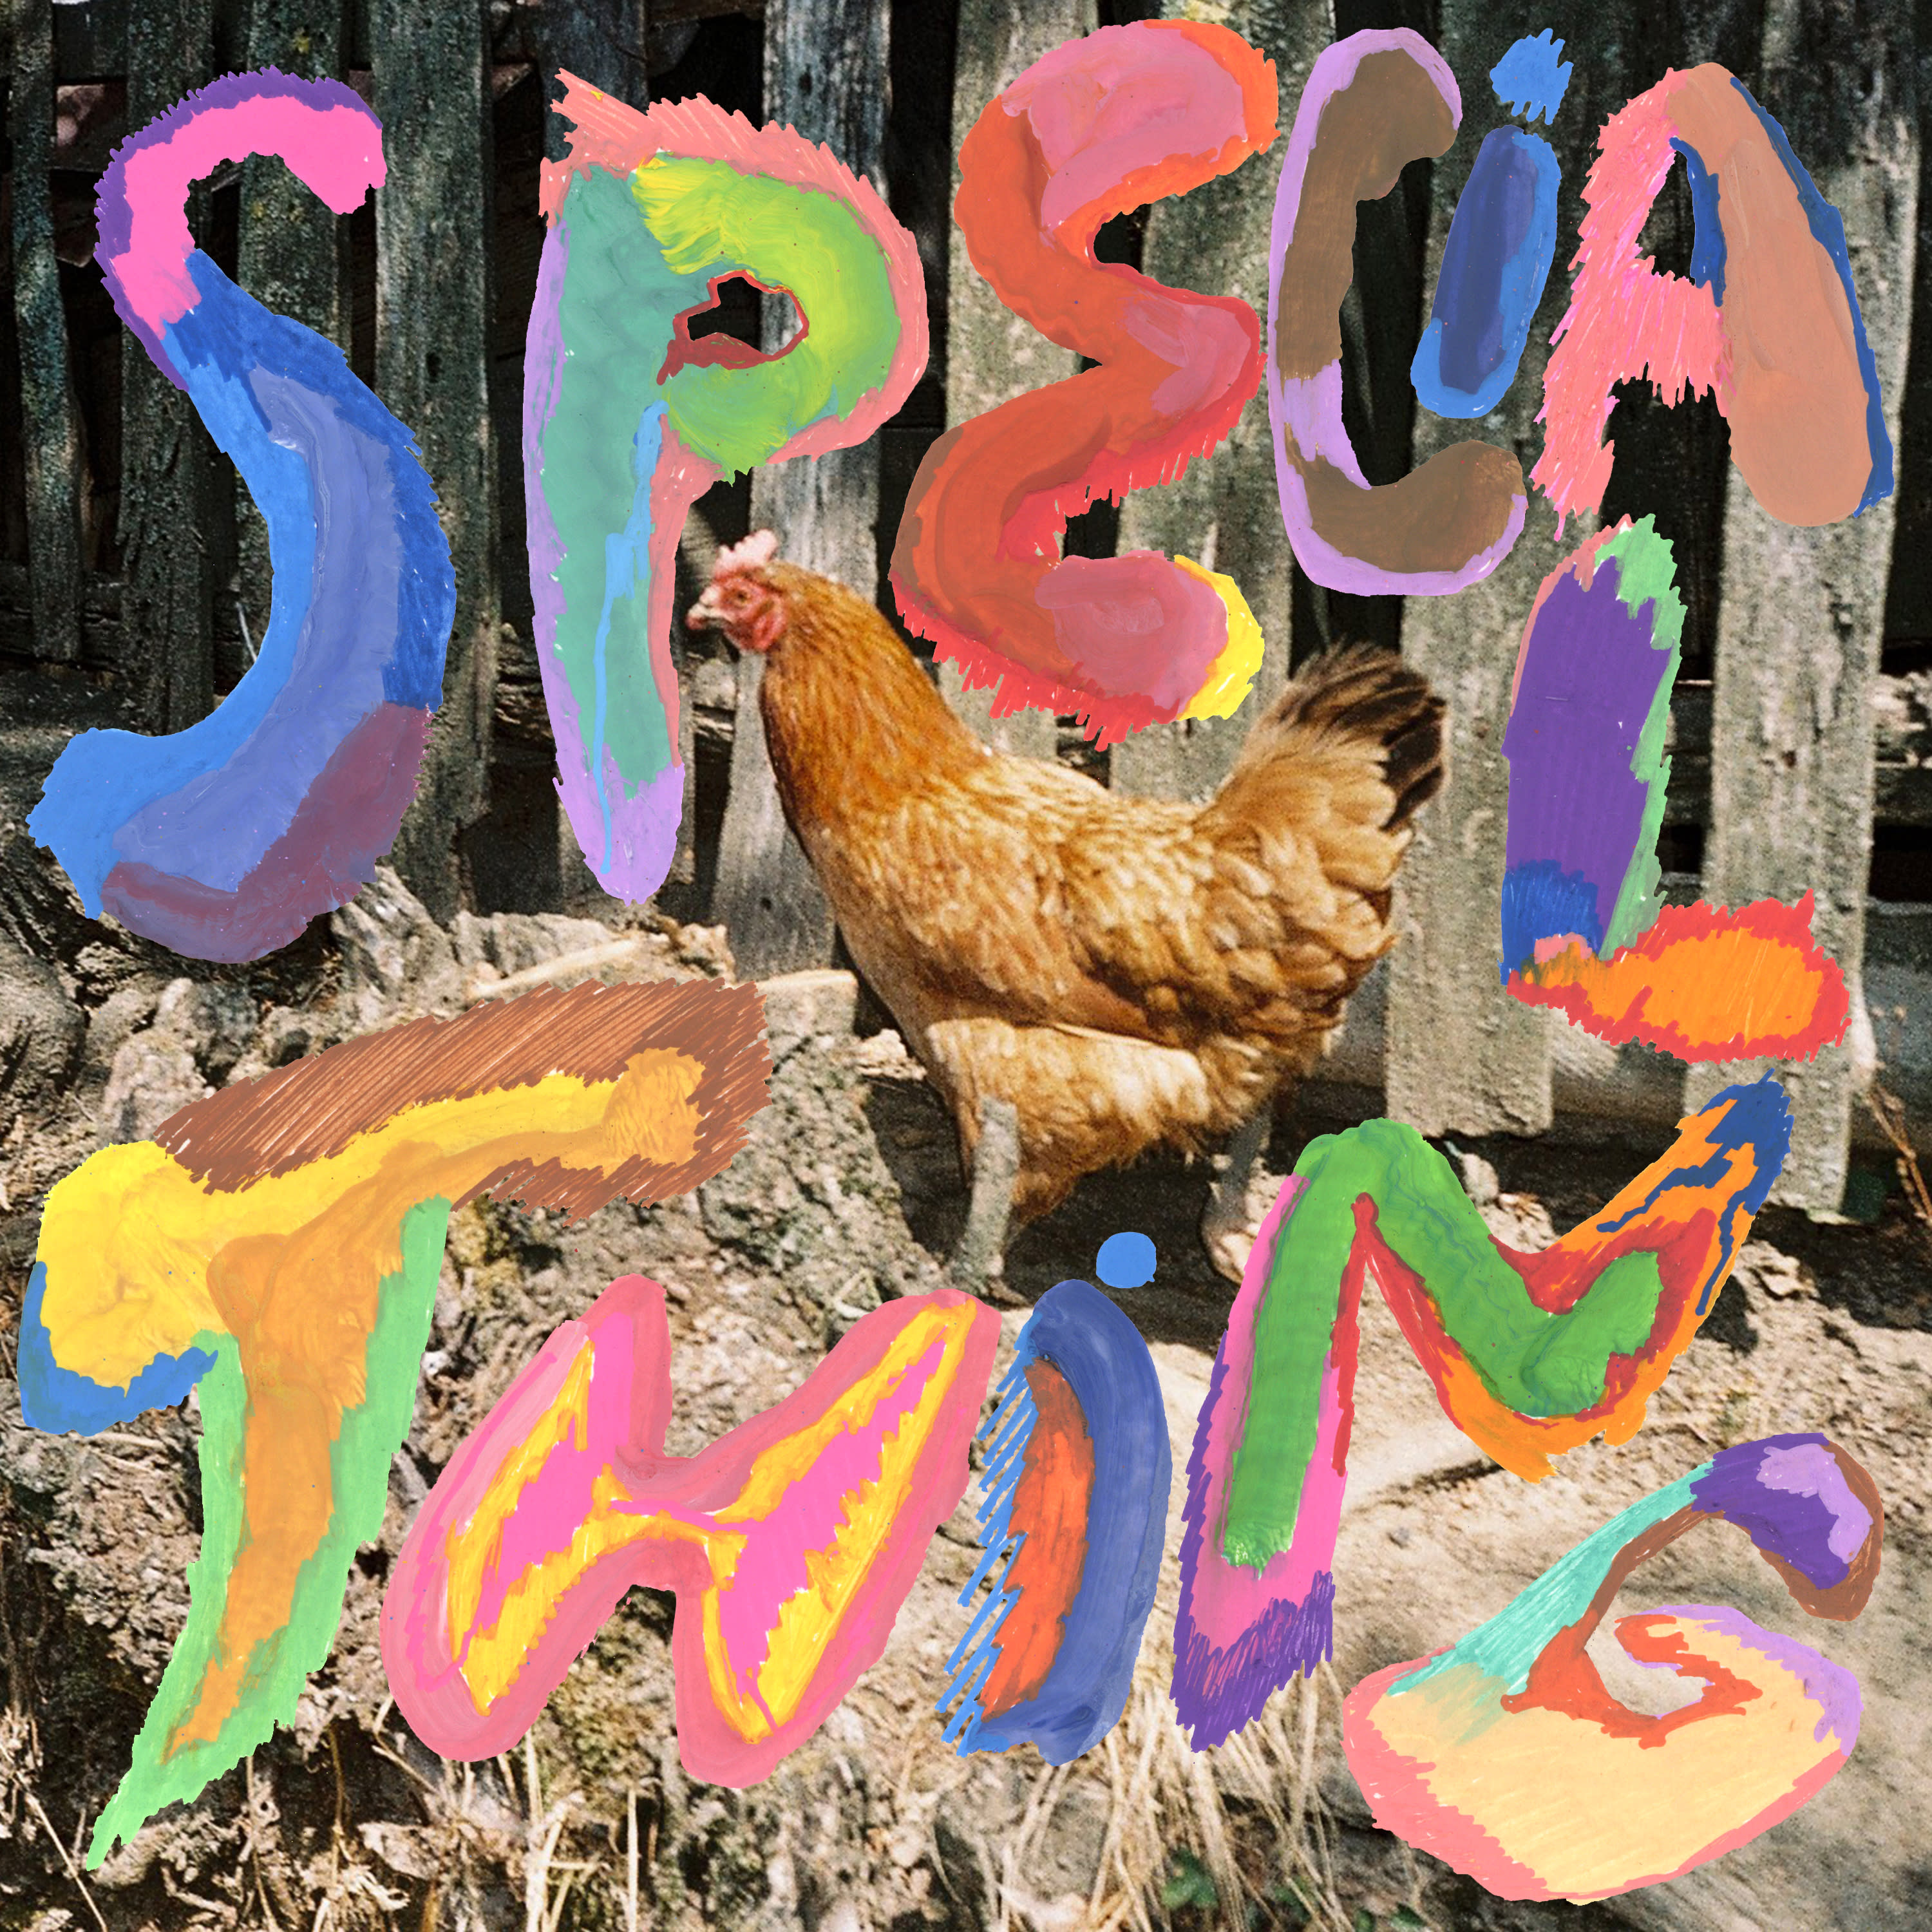 We used an old photograph of a chicken for the last single